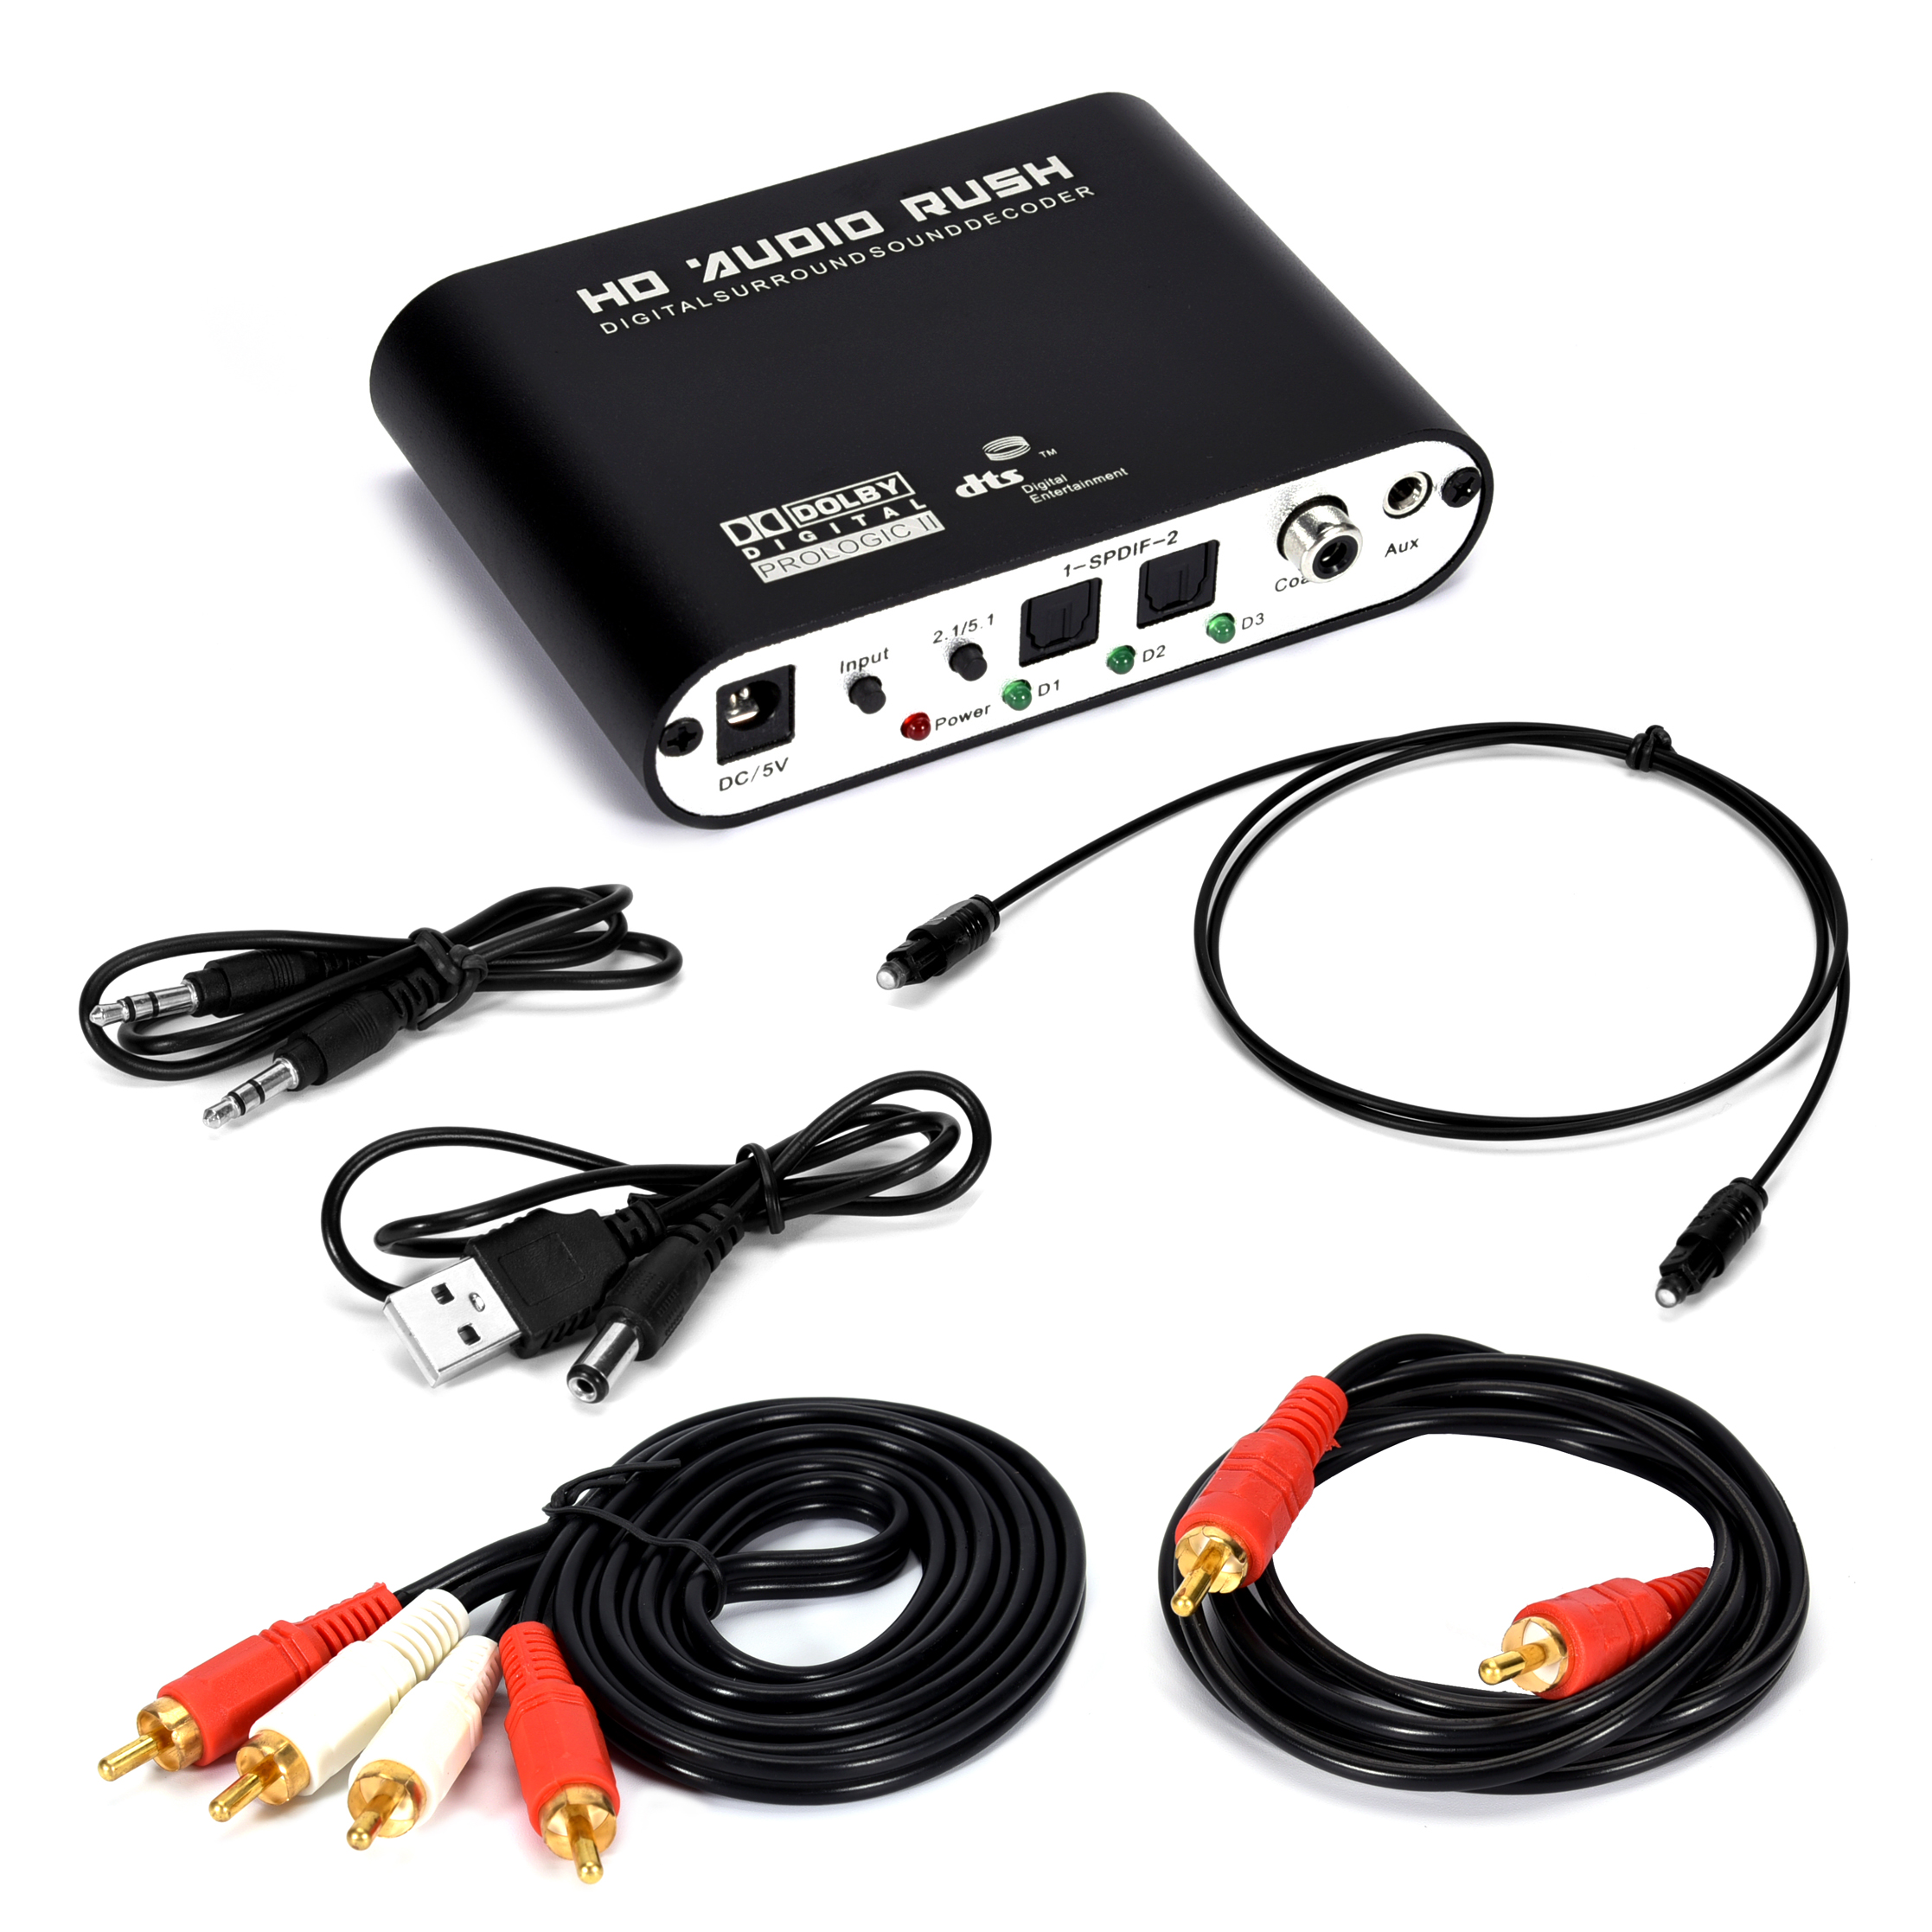 Digital to Analog 5.1 channel Stereo AC3 Audio Converter Optical SPDIF Coaxial AUX 3.5mm to 6 RCA Sound Decoder Amplifier 8